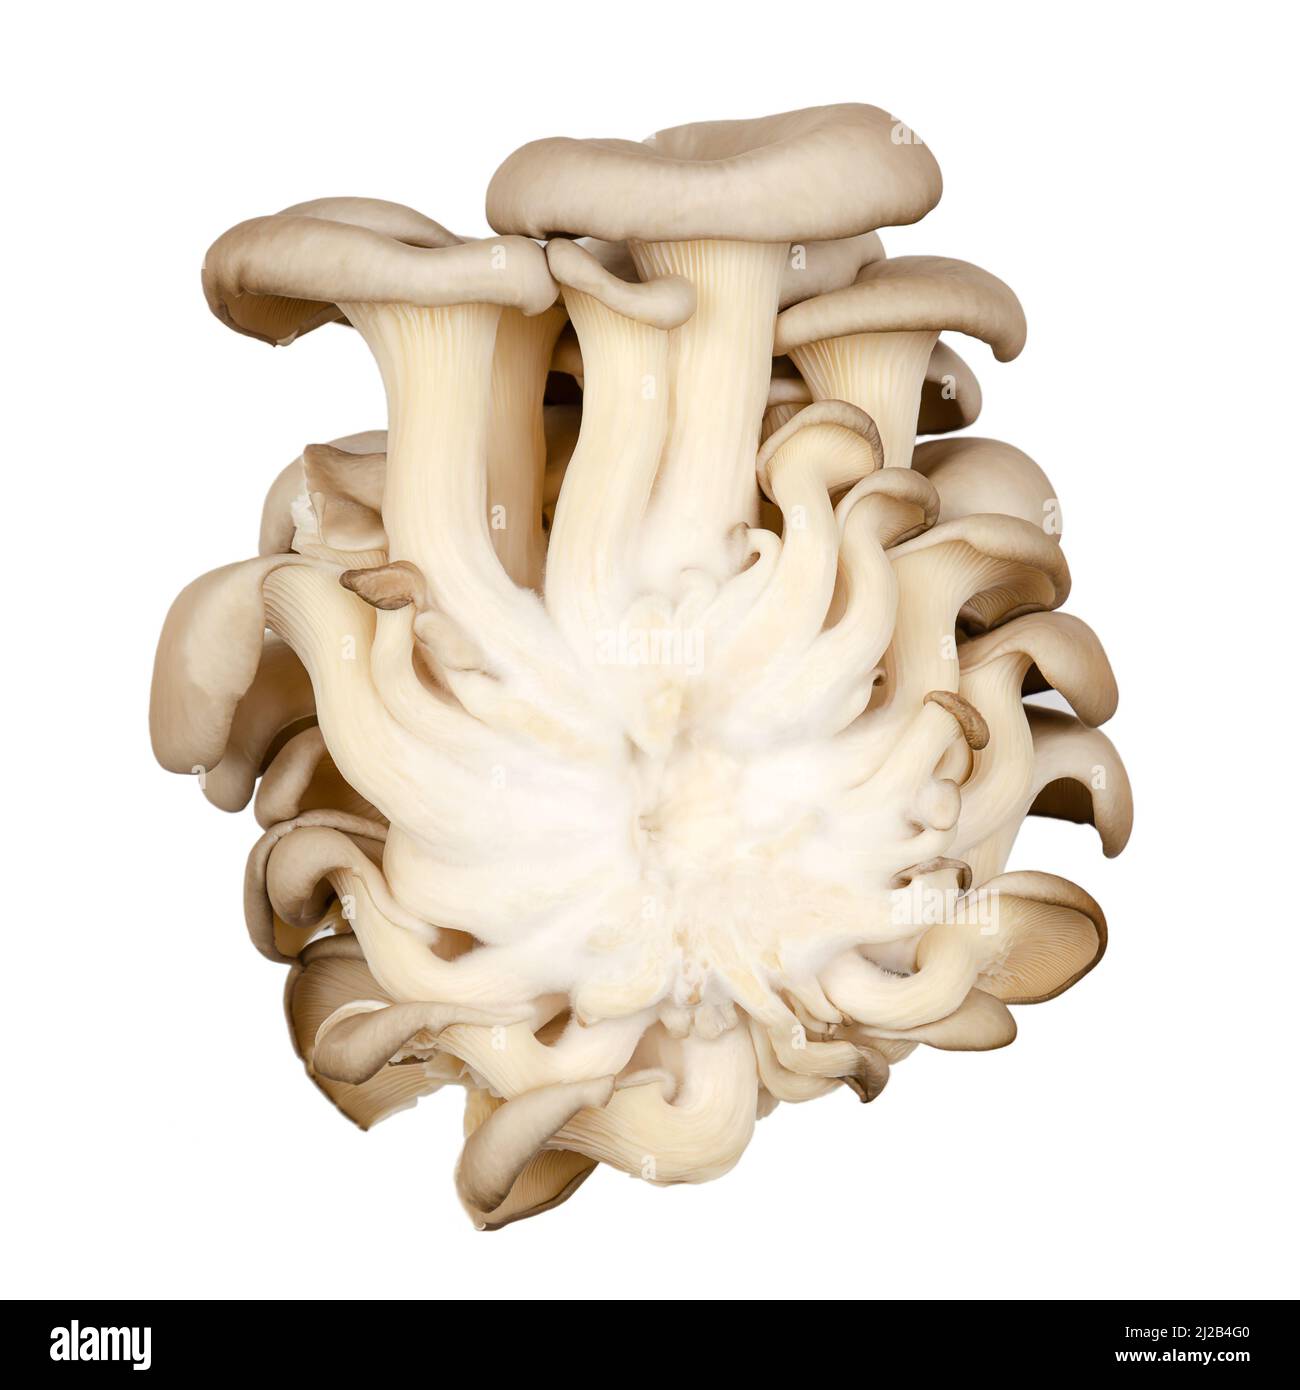 Cluster of fresh oyster mushrooms, back view. Pleurotus, also known as abalone or tree mushrooms. One of the most widely cultivated mushrooms. Stock Photo